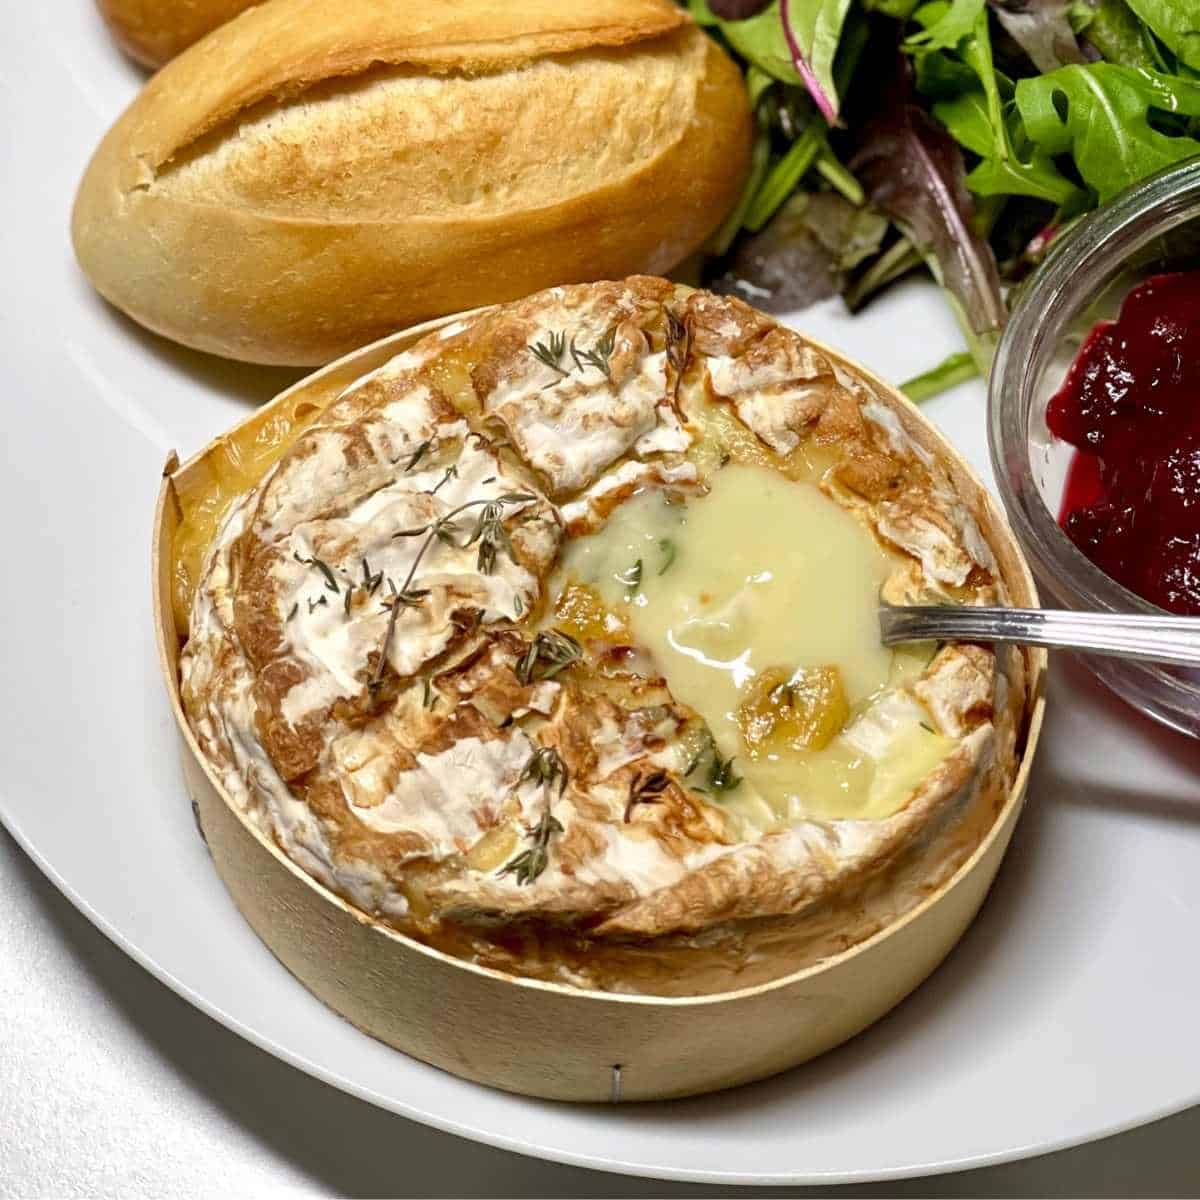 Air Fryer Baked Camembert in its wooden box, oozing with a stainless steel spoon sticking on the right side, all on a white plate with a crusty roll and some cranberry sauce